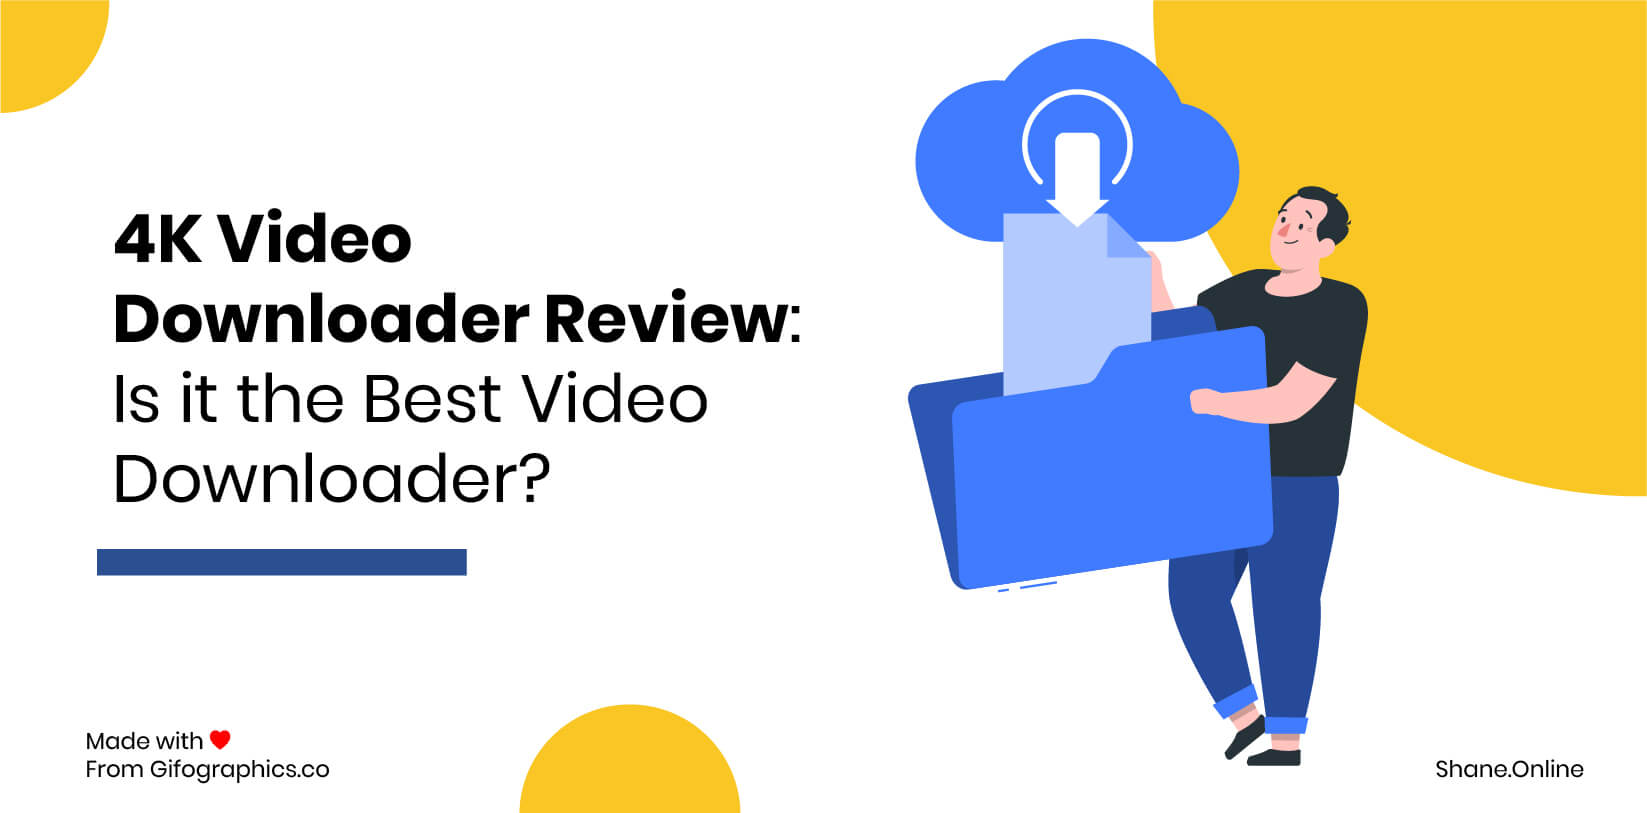 4K Video Downloader Review: Is it the Best Video Downloader in 2022?